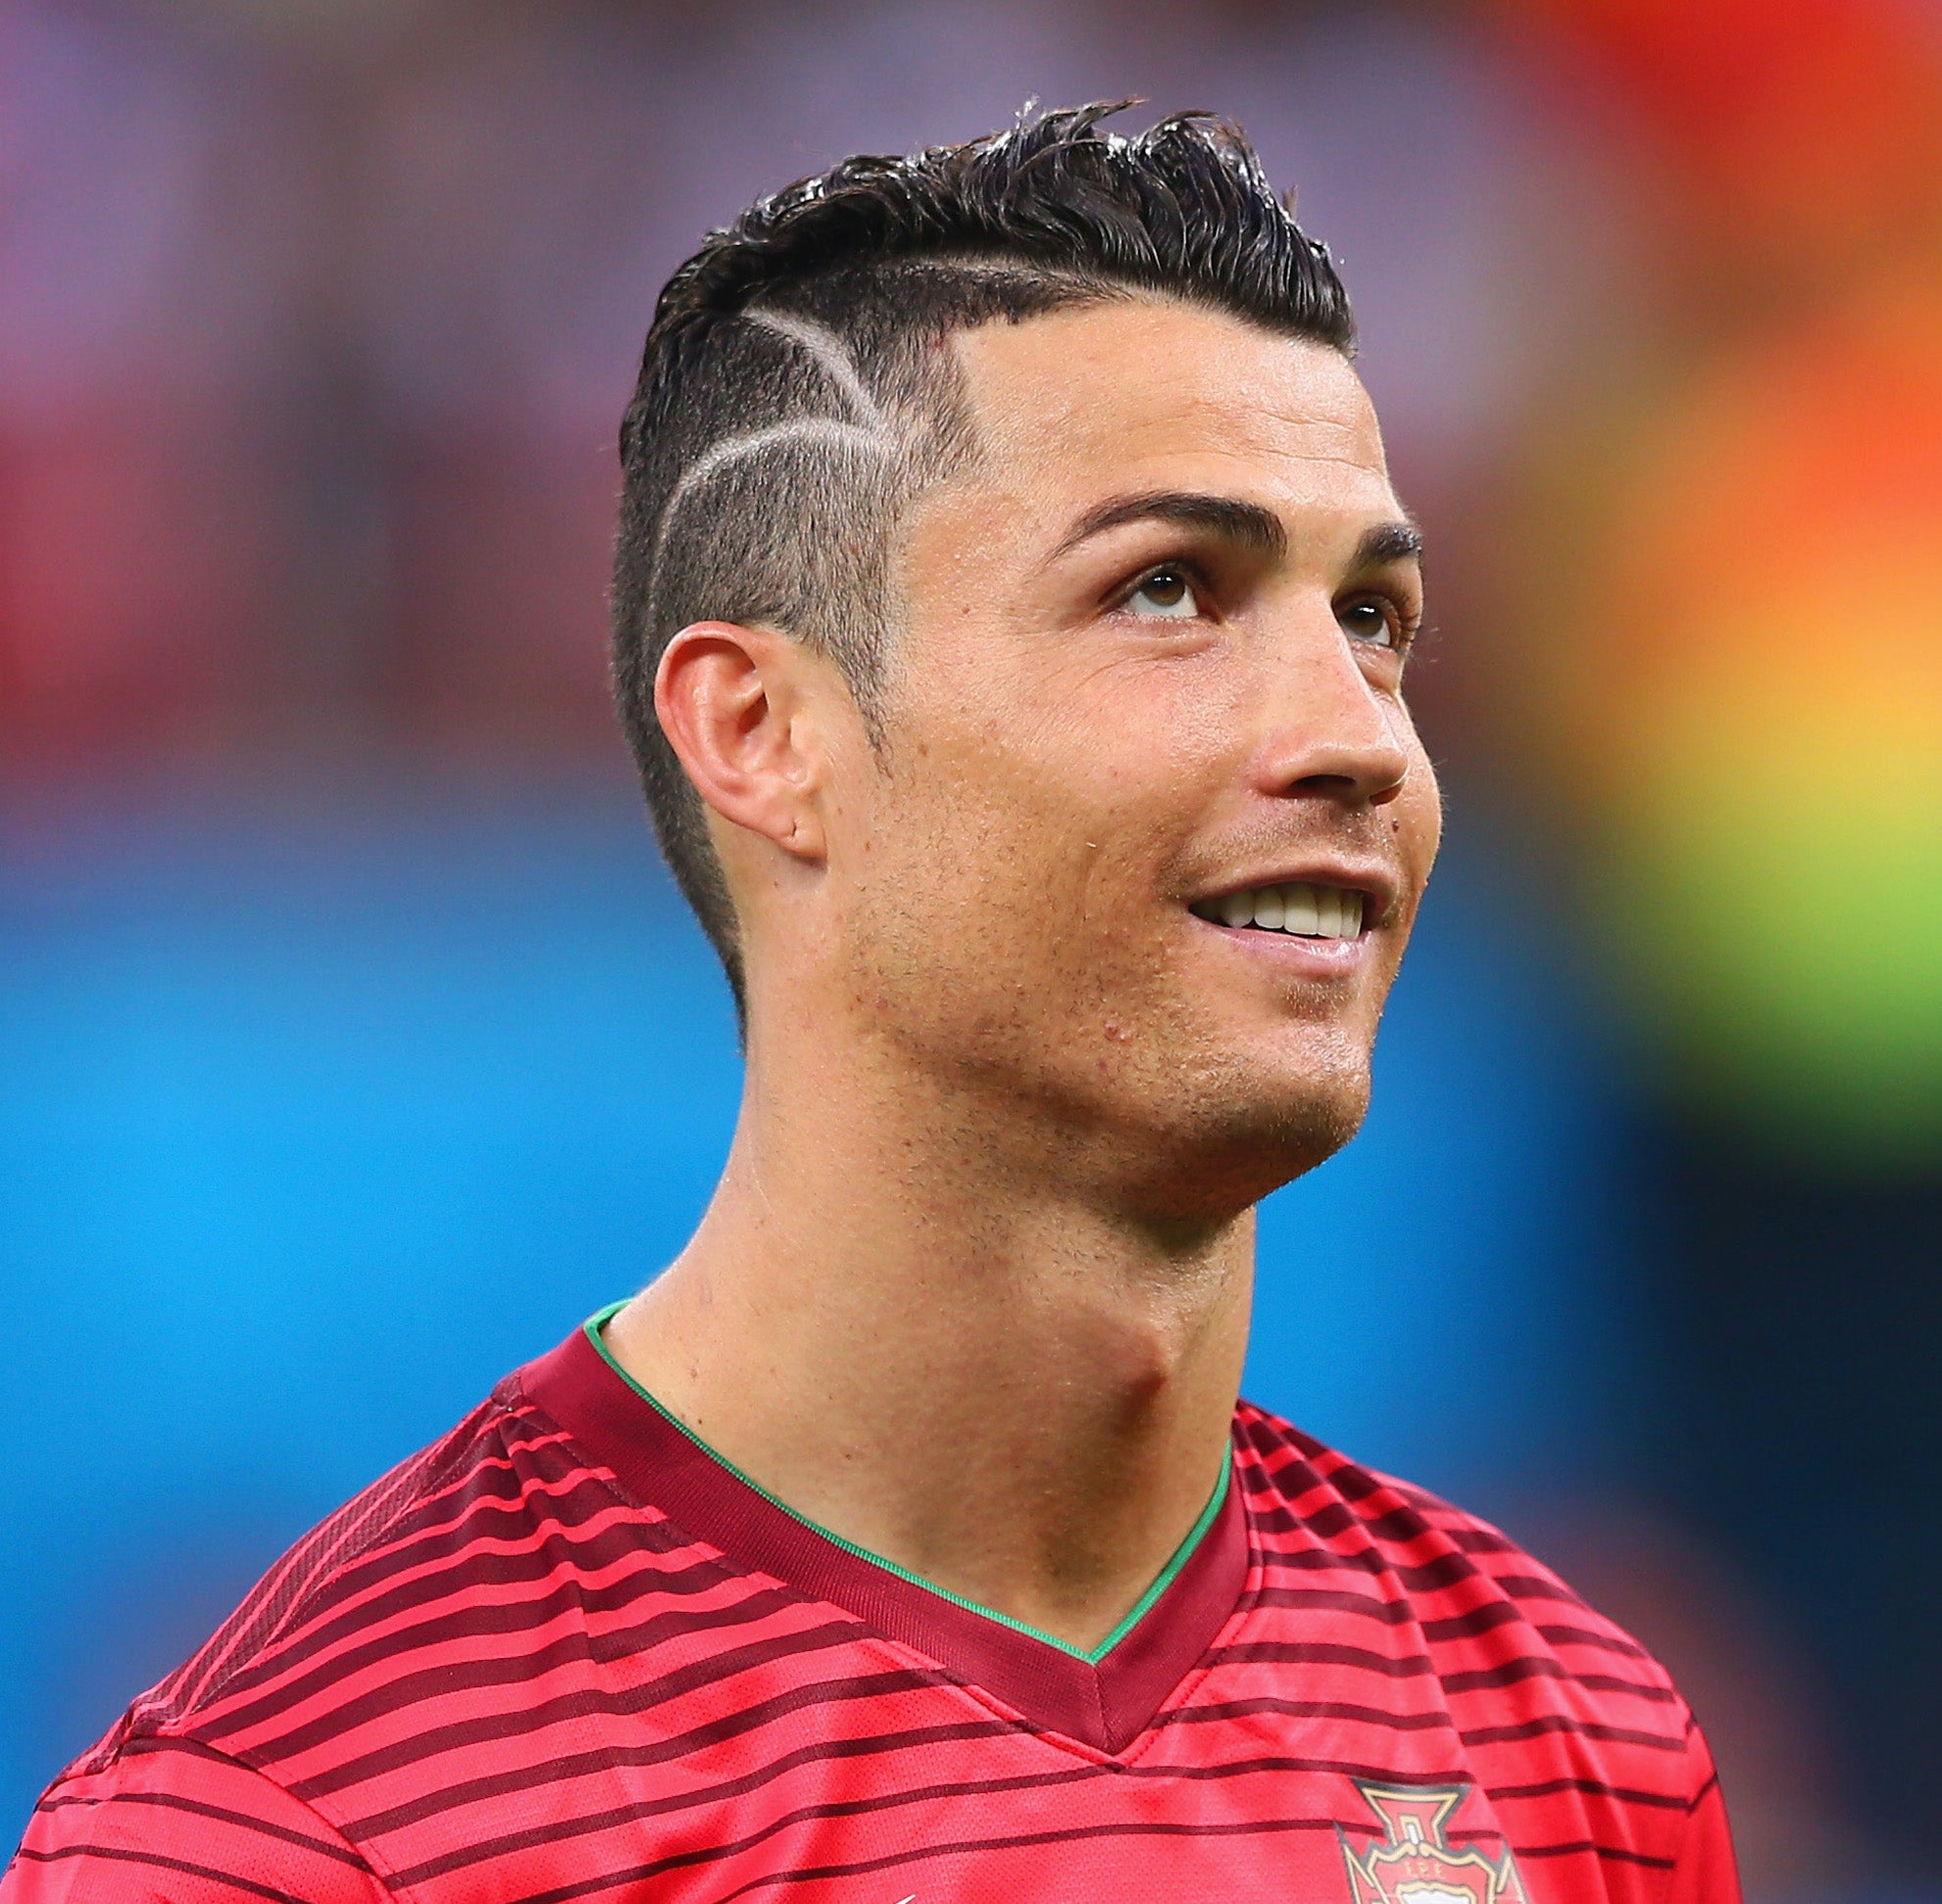 Did Cristiano Ronaldo Really Cut His Hair For A Kid With A Brain Tumor?